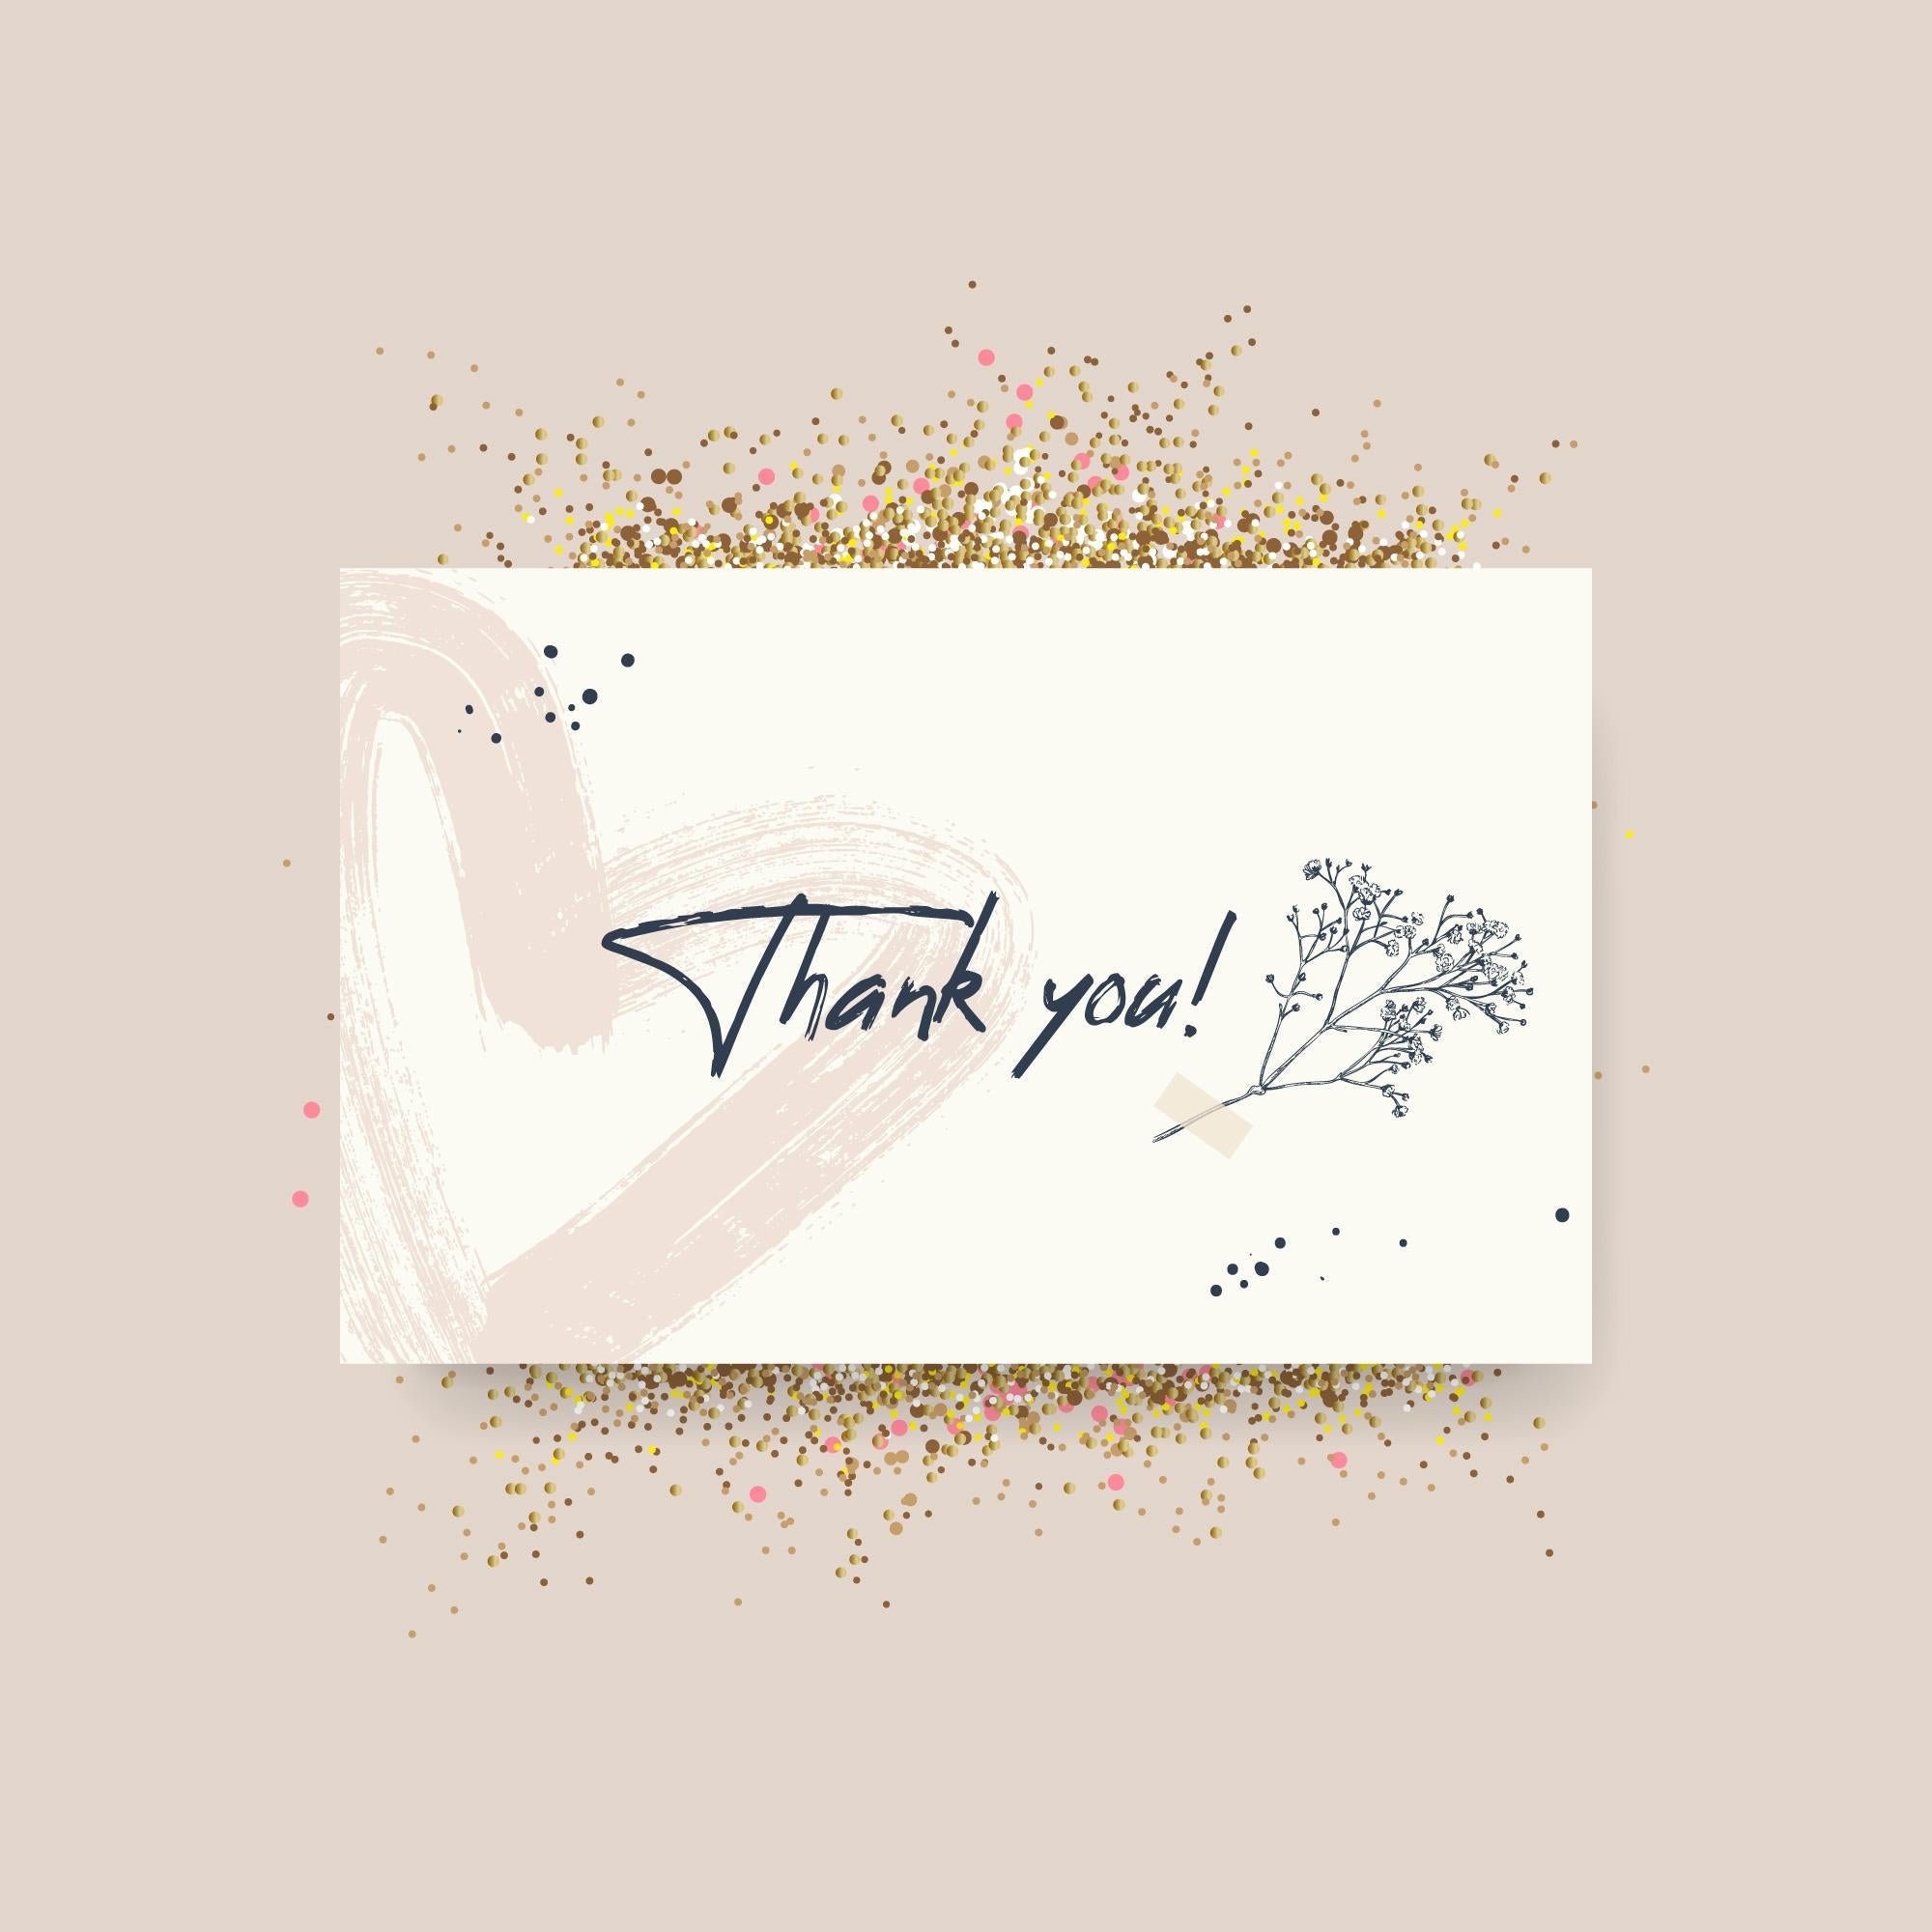 Thank You Card | Express Gratitude with Elegant 4x6 inches-500 Cards | 300gsm Art Paper Material